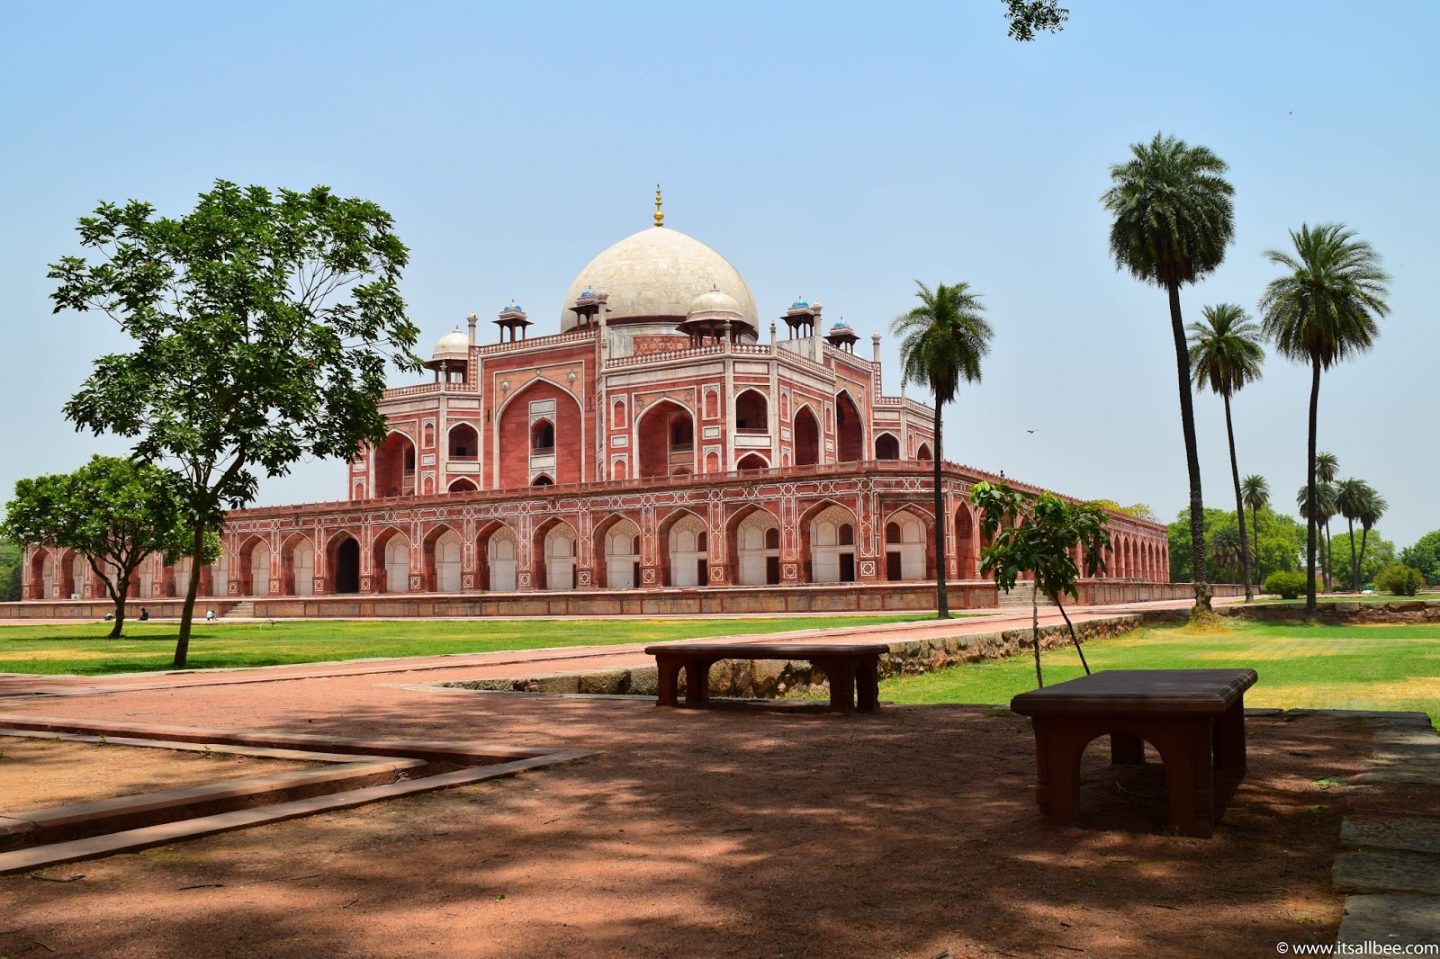 The perfect Delhi itinerary for 3 days - Delhi travel guide with things to do, places to visit in Delhi, how to get around in Delhi, day trips from Delhi, visa info and more. Delhi travel incredible India #ASIA #GOLDENTRIANGLE #femaletravellers #solotravel #adventure - delhi travel photography - delhi india market - delhi india streets - delhi india streets